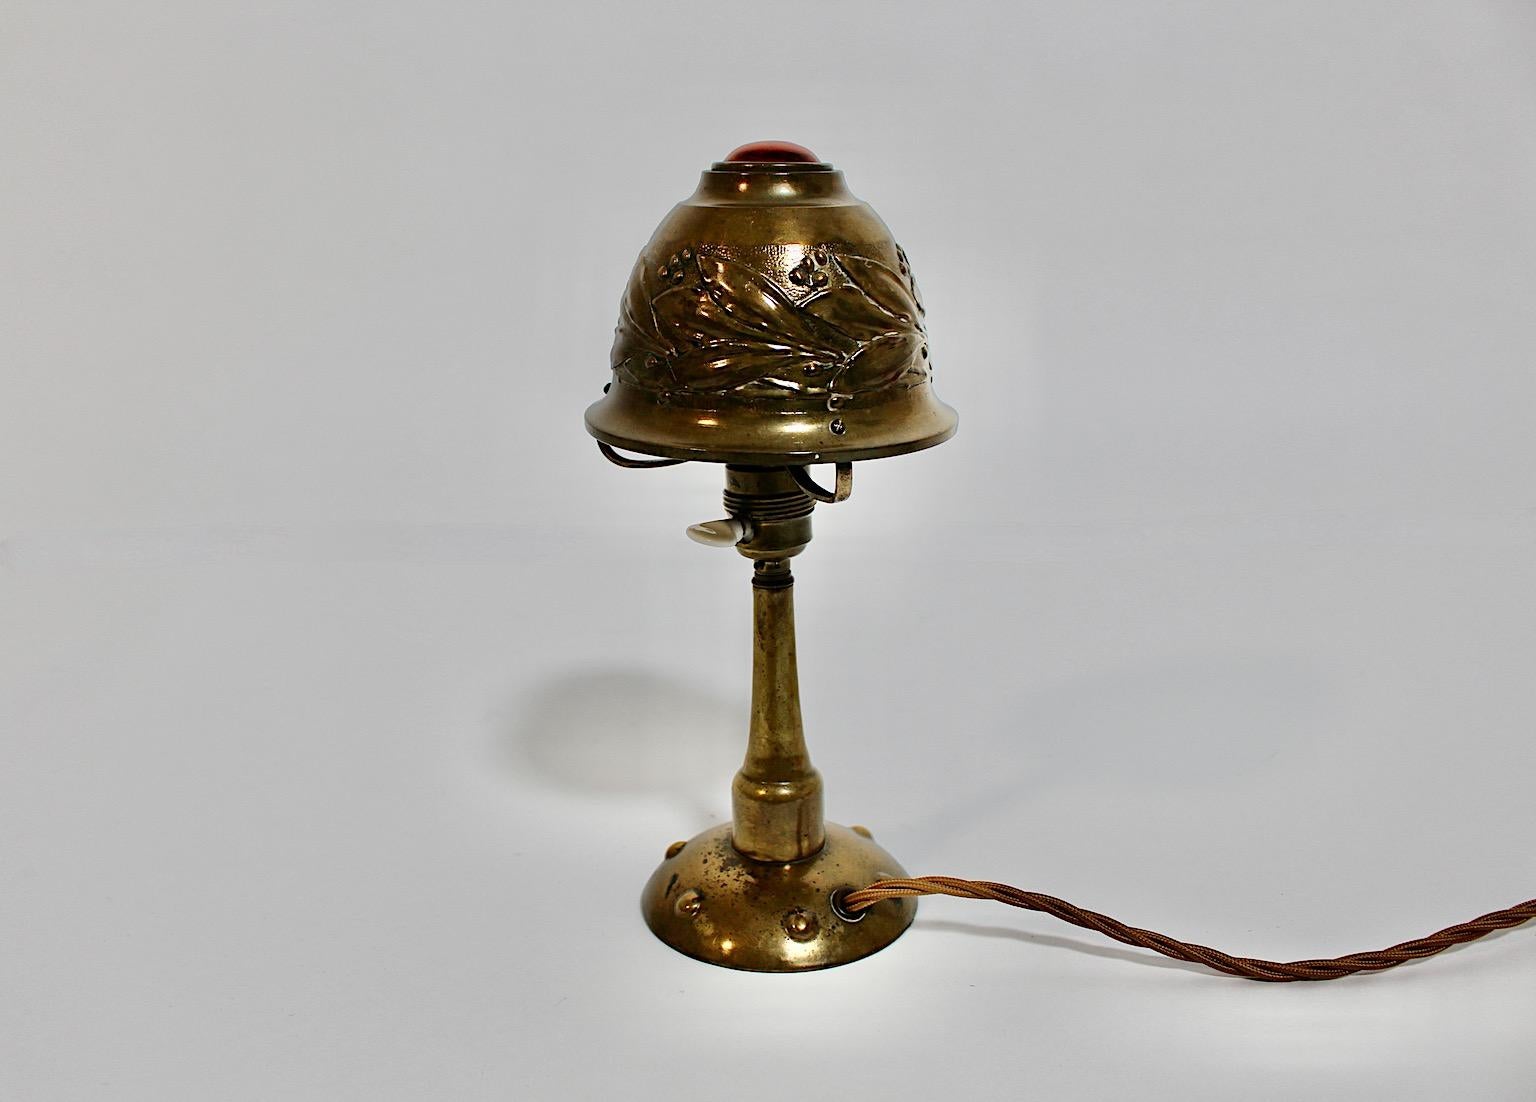 Early 20th Century Art Nouveau Vintage Brass Dome Table Lamp Bedside Lamp circa 1910 France For Sale